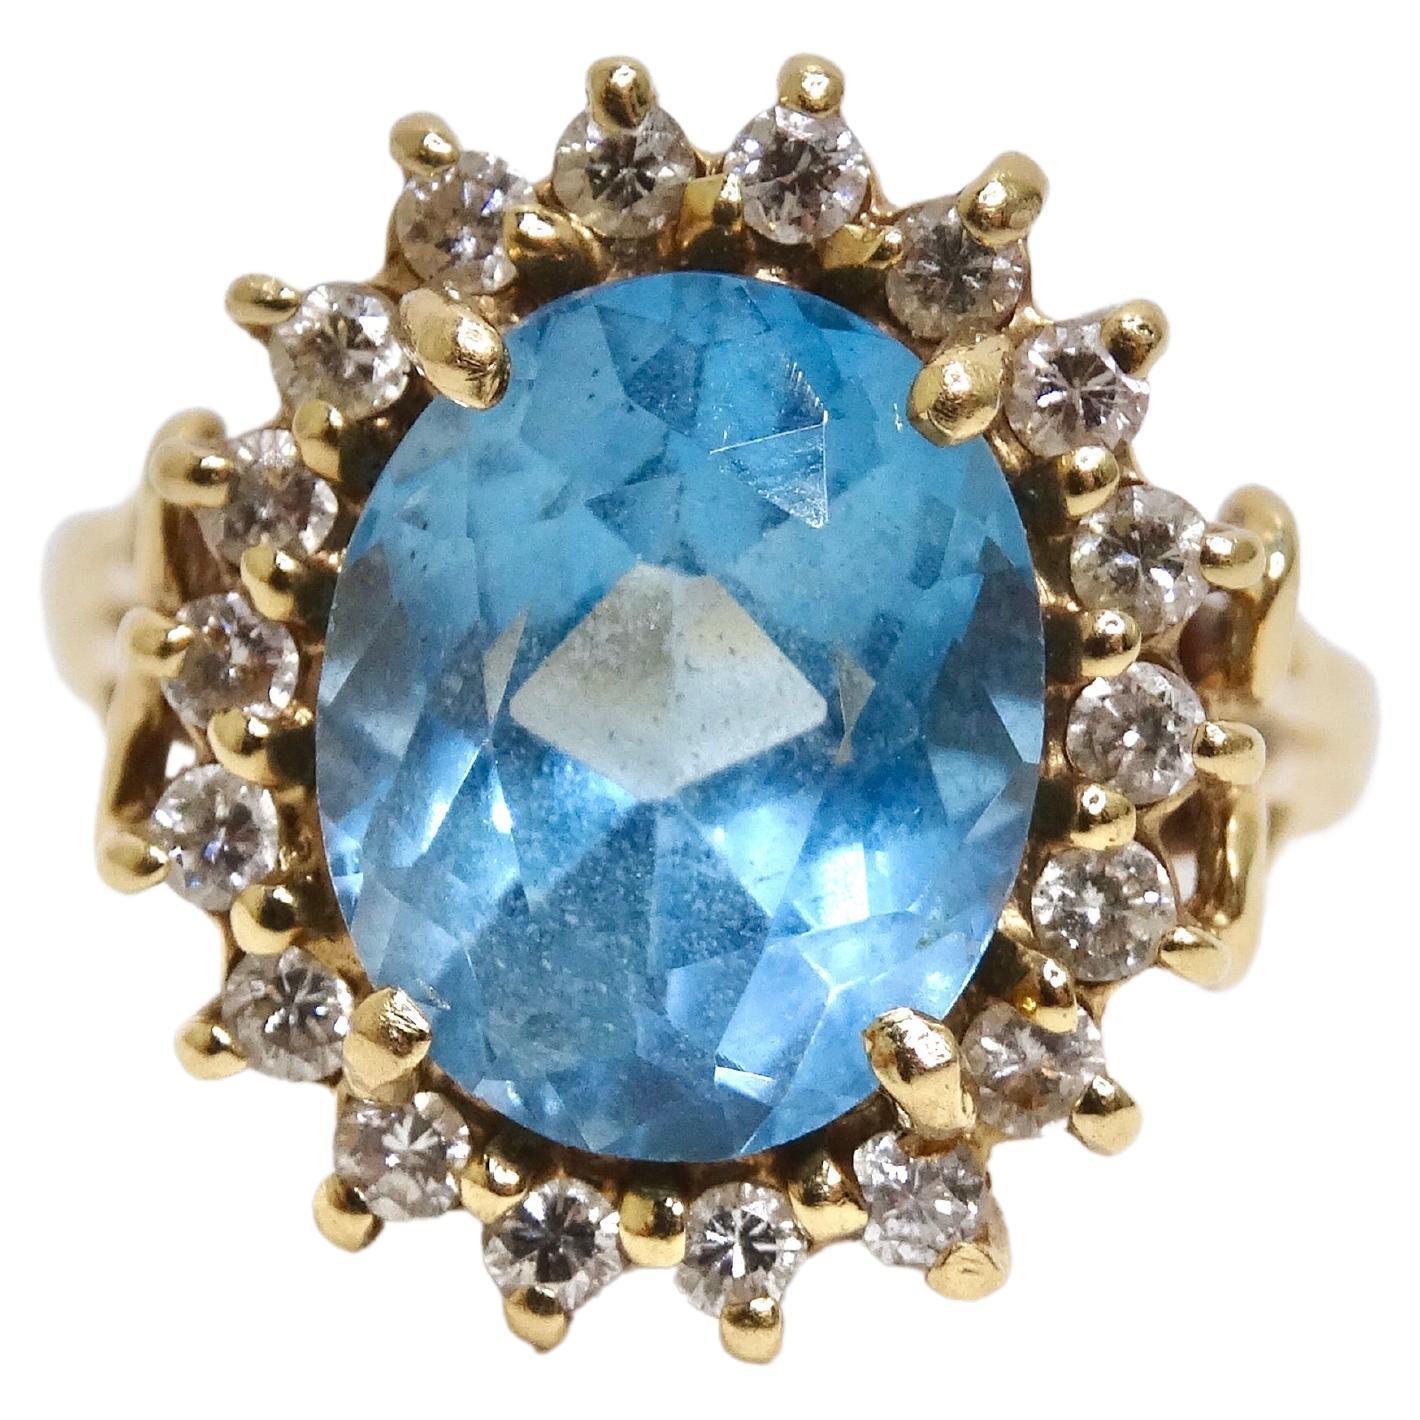 You will be mesmerized by the beauty of this ring! You can wear the beauty and wonder of the deep sea on your fingers. It features an extravagant aquamarine stone that has arguably the most beautiful color of all gems. Aquamarine is the birthstone